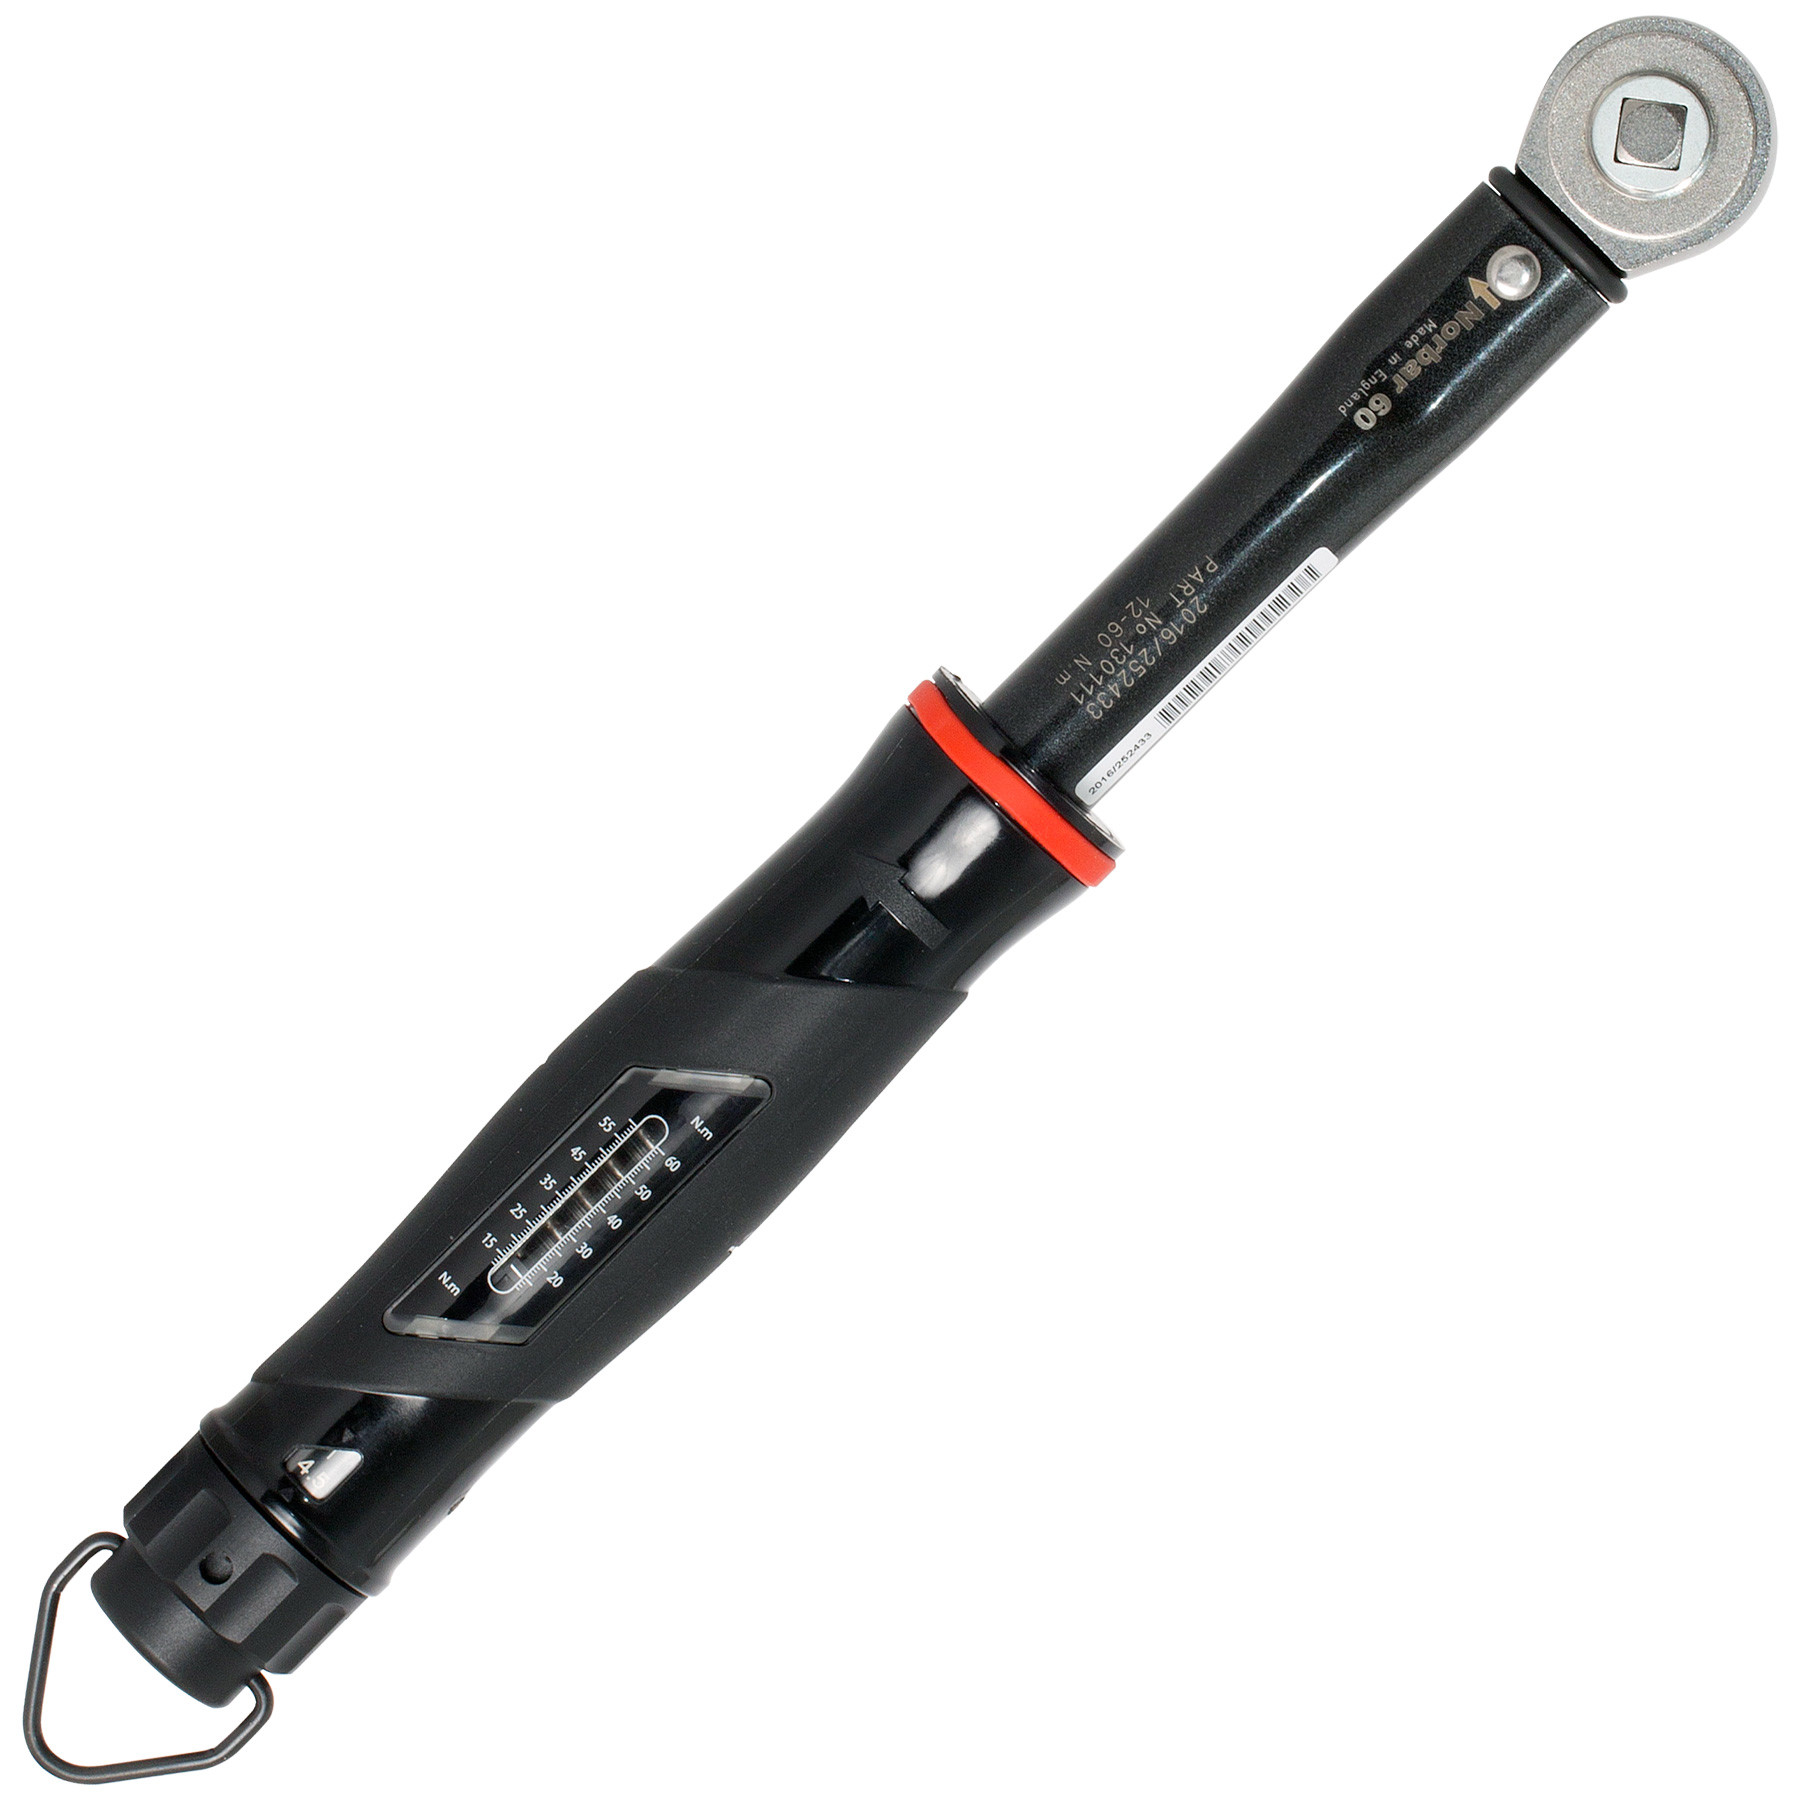 Bahco 3/8 in Square Drive Mechanical Torque Wrench, 10 → 60Nm - RS  Components Vietnam